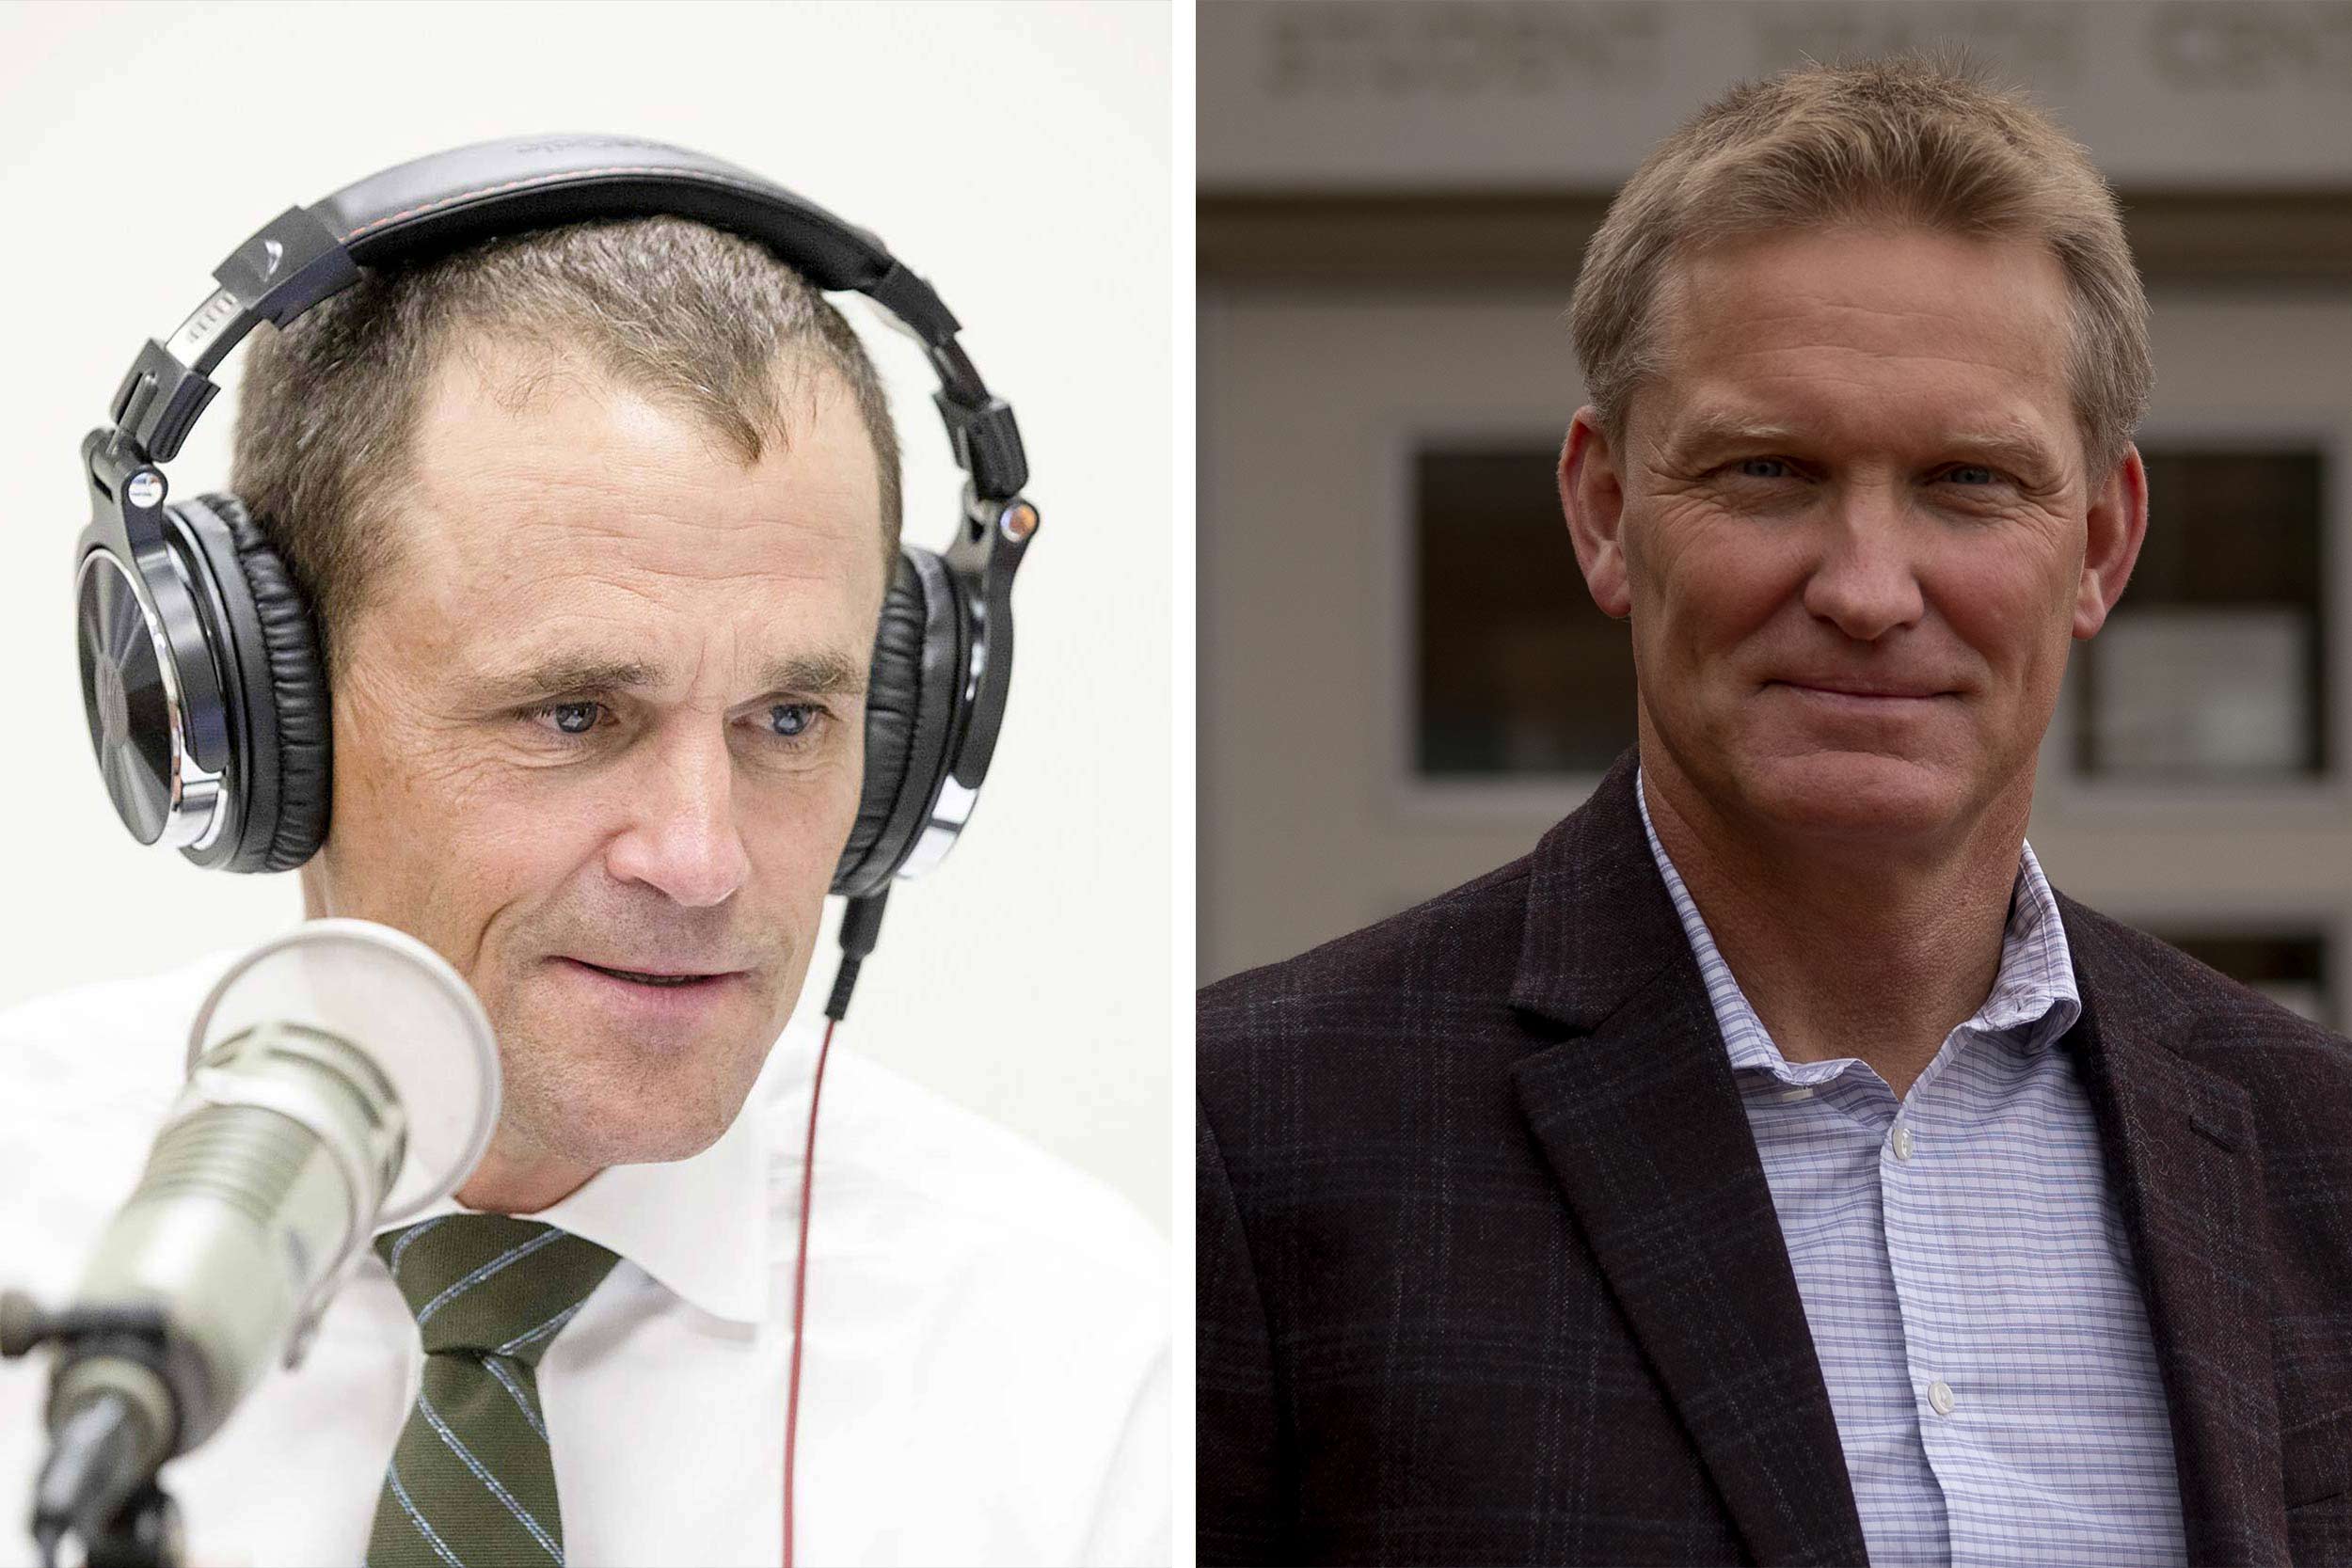 Portrait of Jim Ryan with headphones and a mic on the left, portrait of Dr. Christopher Holstege on the right